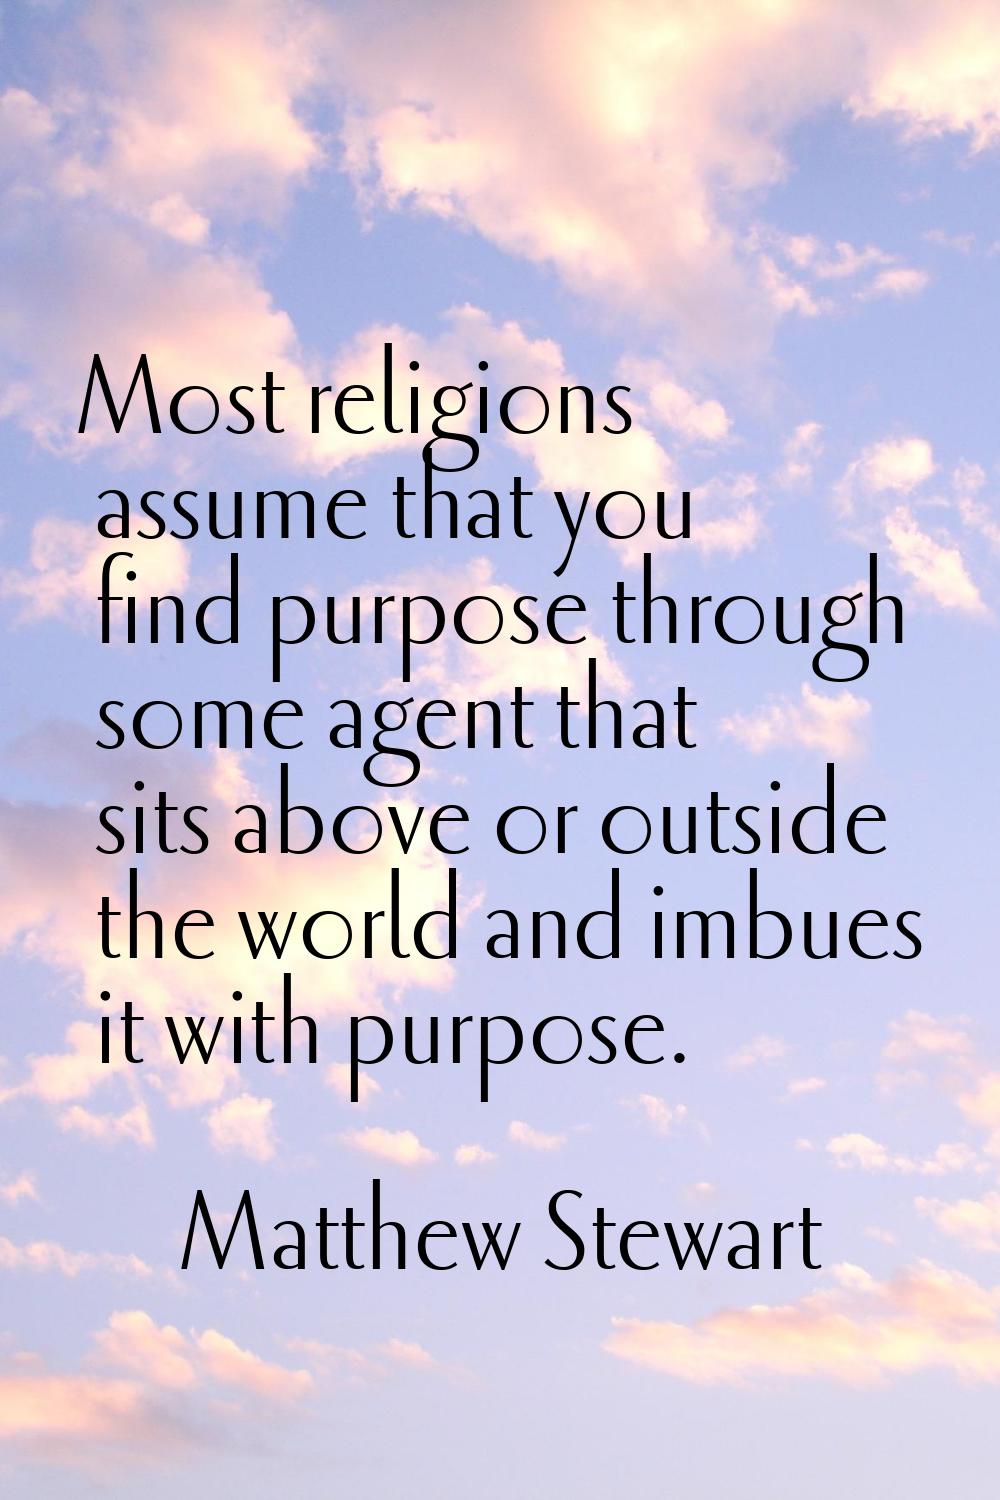 Most religions assume that you find purpose through some agent that sits above or outside the world